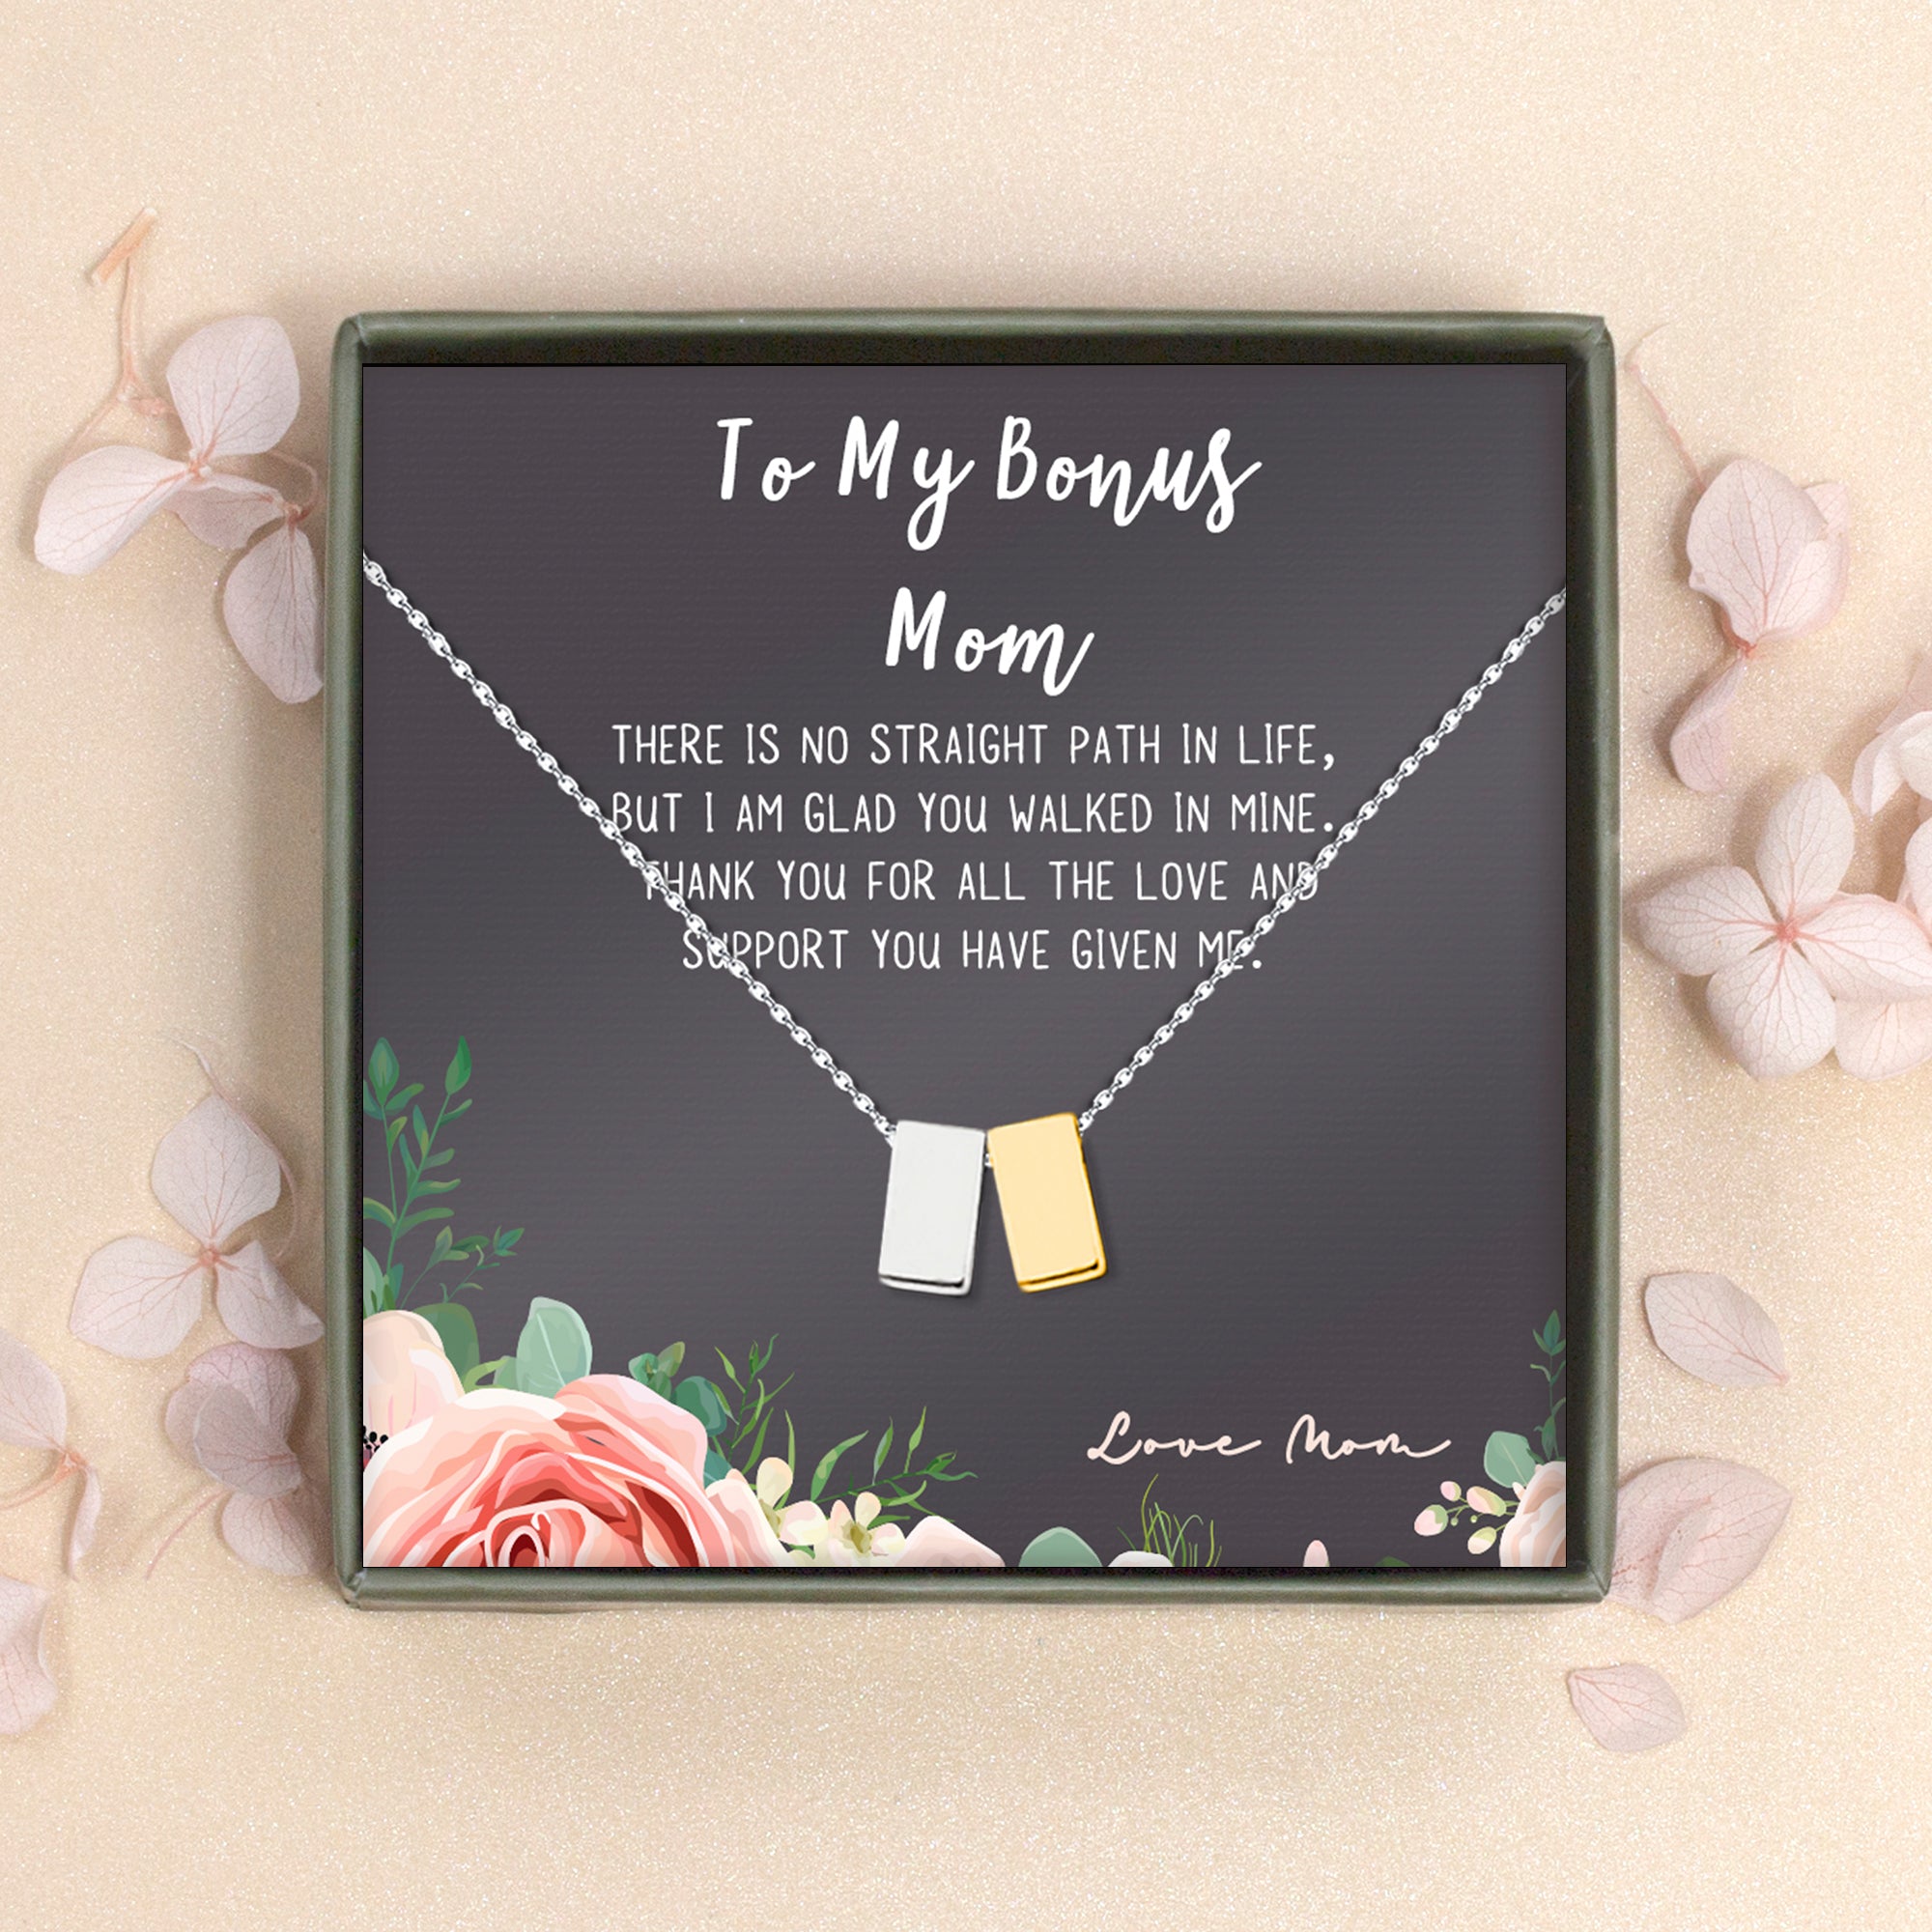 Amazon.com: VELENTI Birthday Gifts for Mom - Engraved Acrylic Block Puzzle  Mom Present 4.1 x 3.5 inch - Cool Mom Presents from Daughter, Son, Dad -  Heartwarming Mom Birthday Gift, Christmas : Home & Kitchen